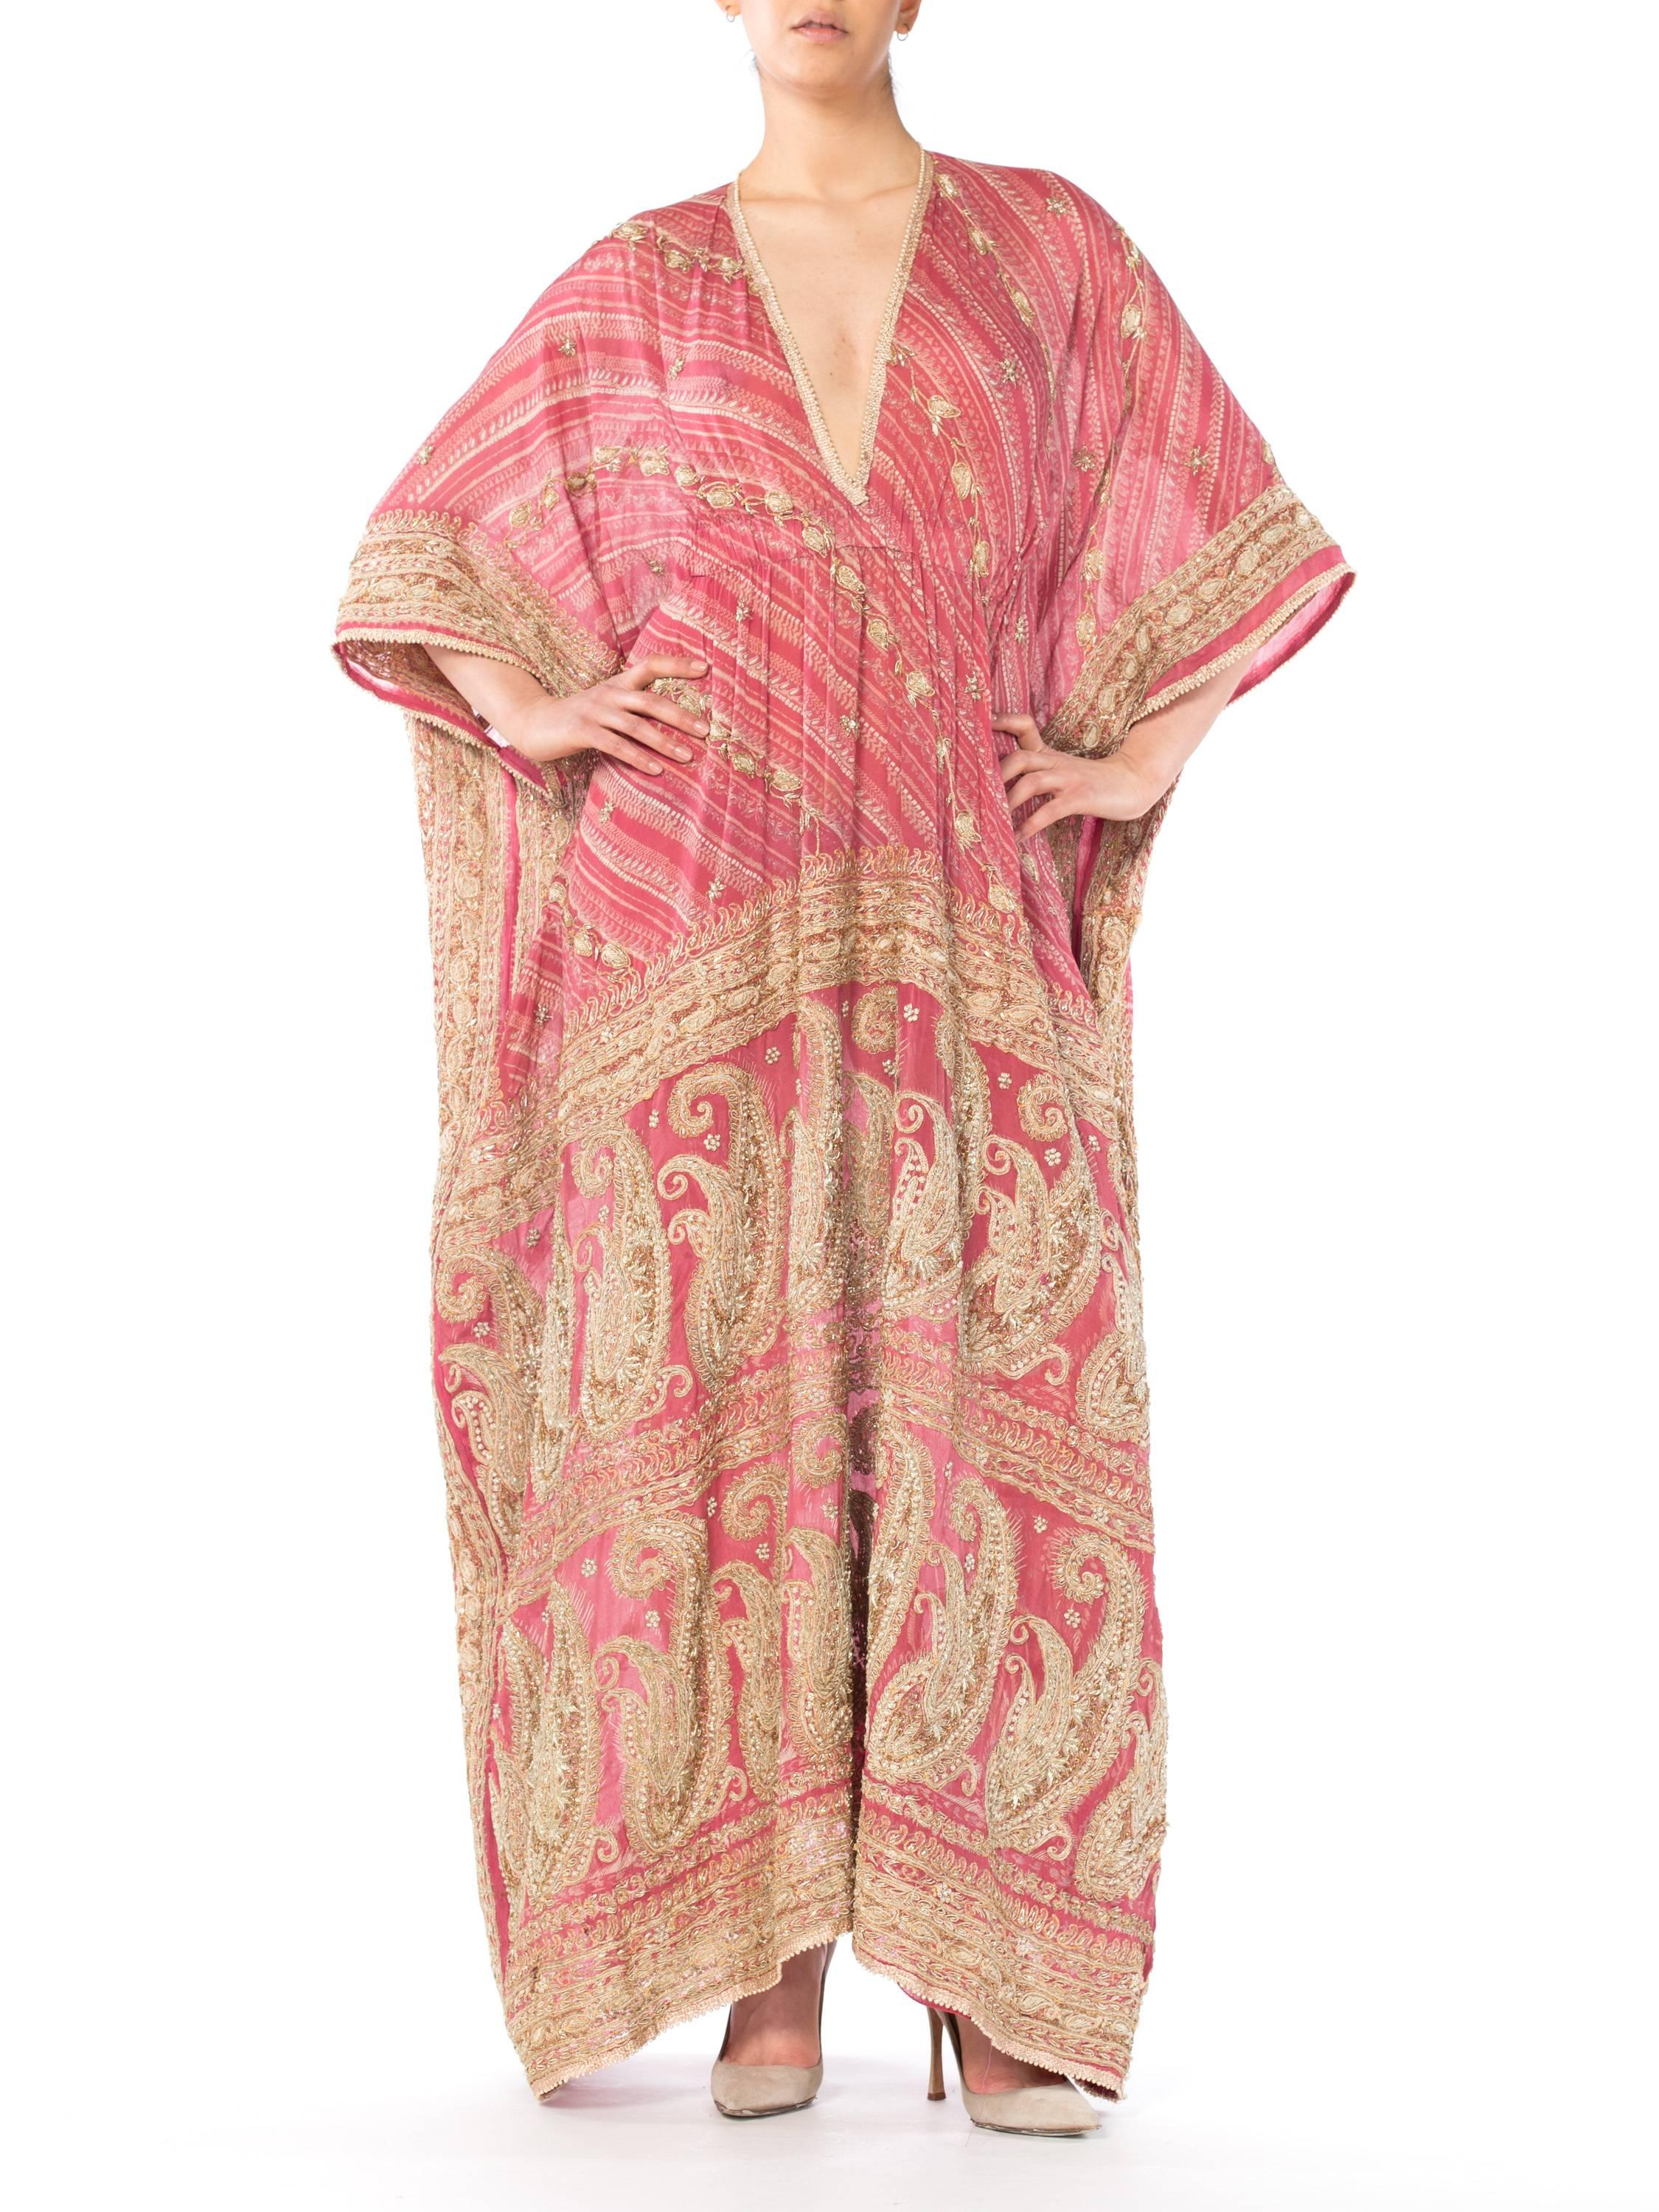 This Kaftan is made from a vintage silk Sari which is completely embroidered with traditional metal and thread Indian Embroidery 